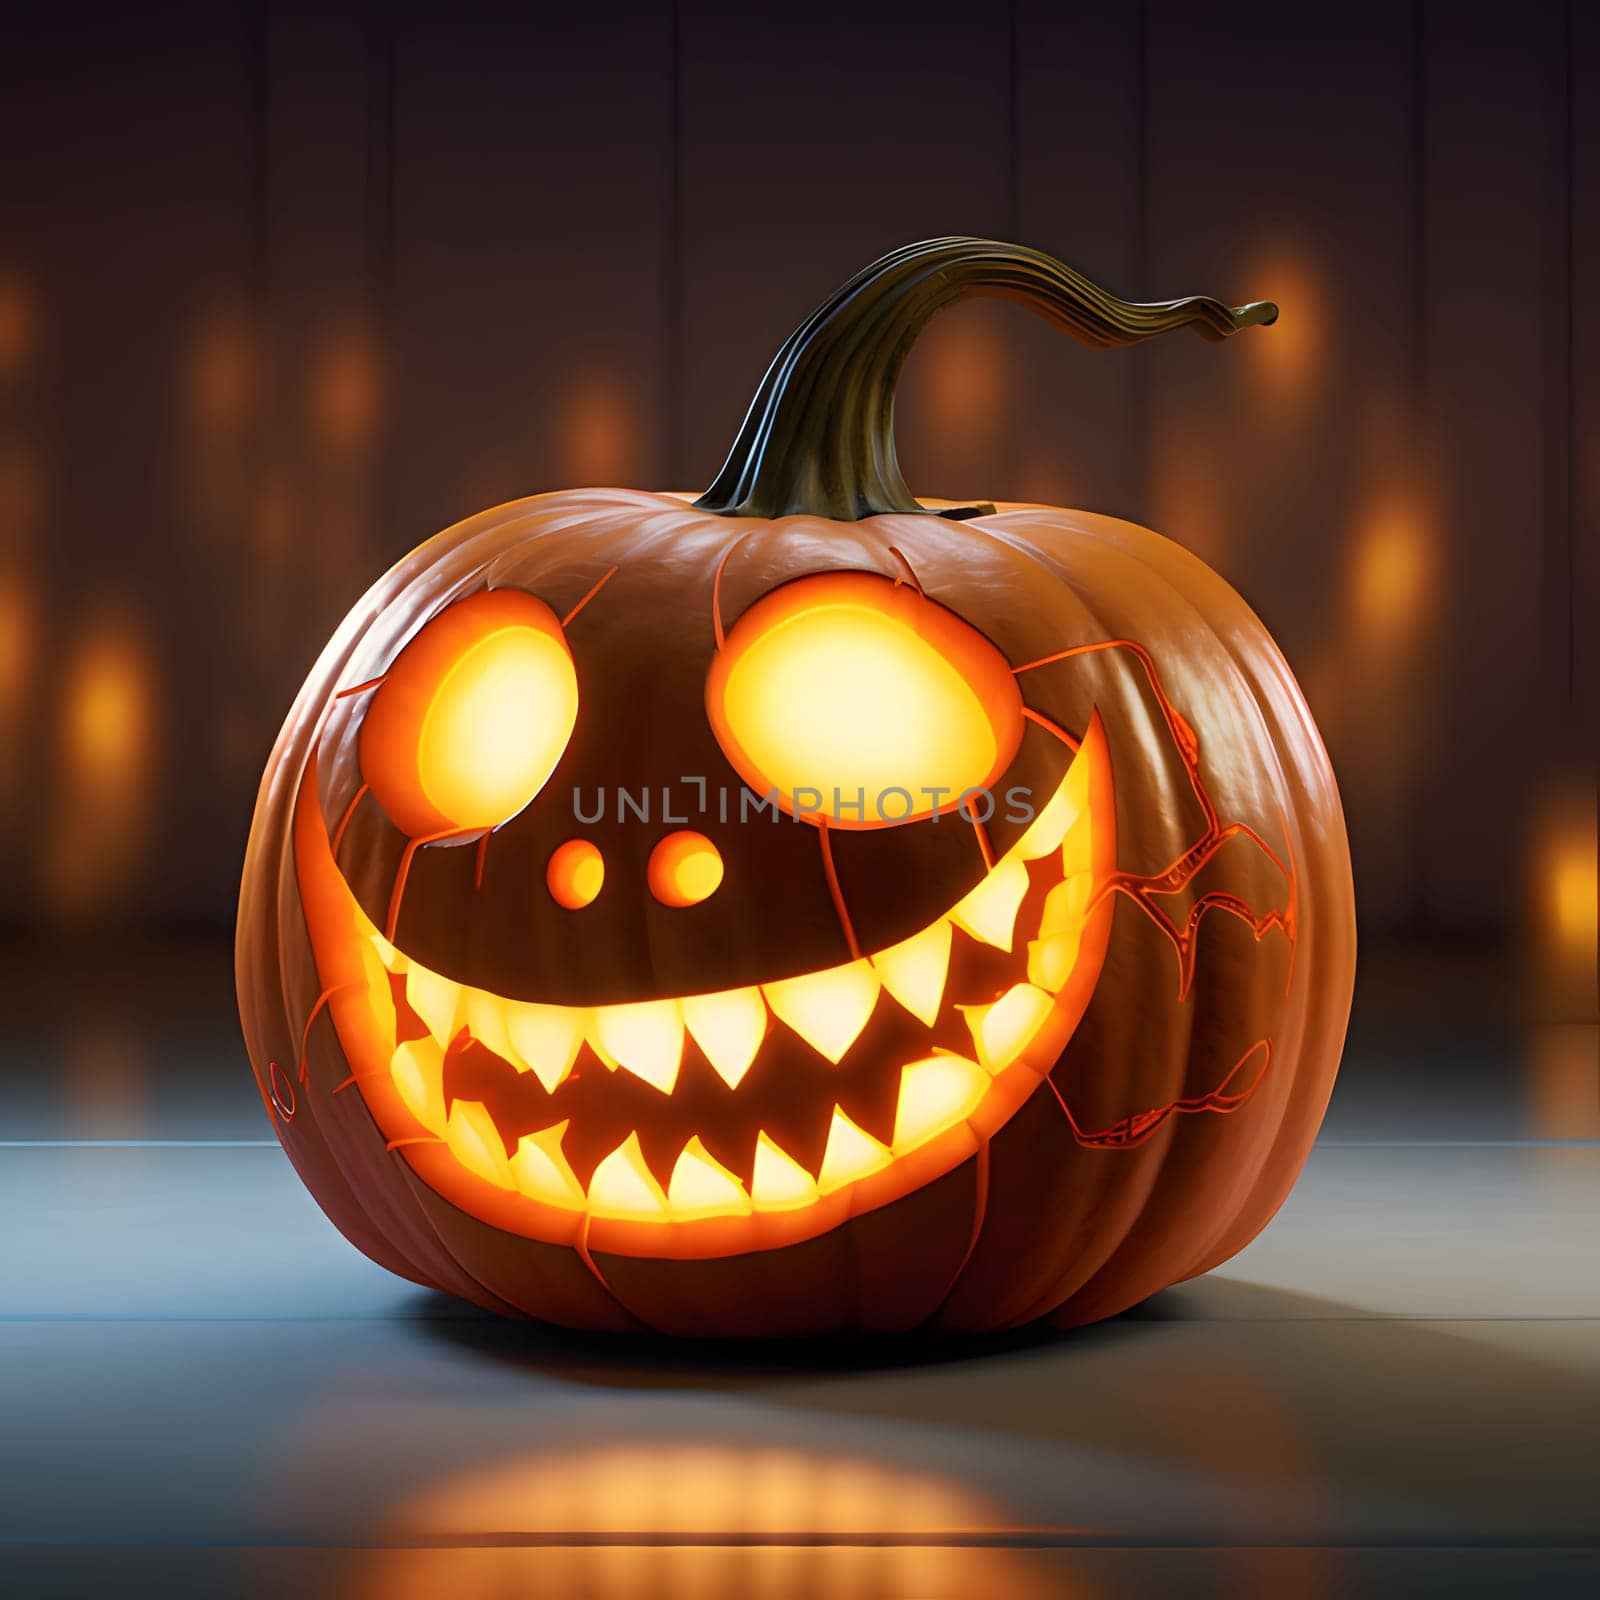 Giant glowing gouged jack-o-lantern pumpkin on a solid background, a Halloween image. by ThemesS